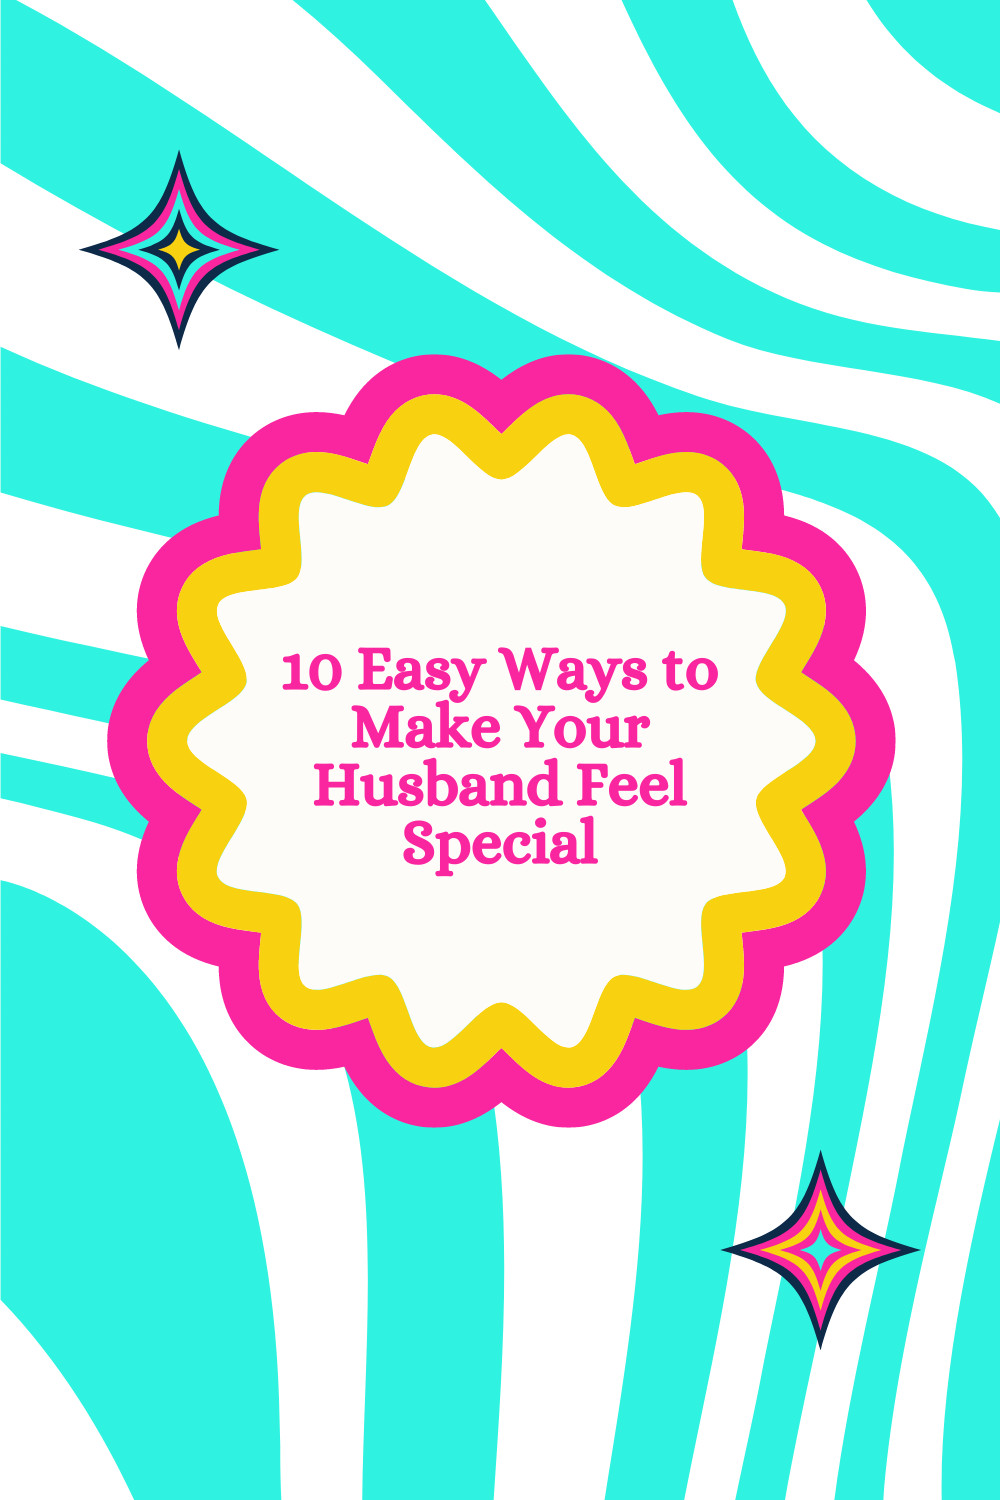 10 Easy Ways to Make Your Husband Feel Special